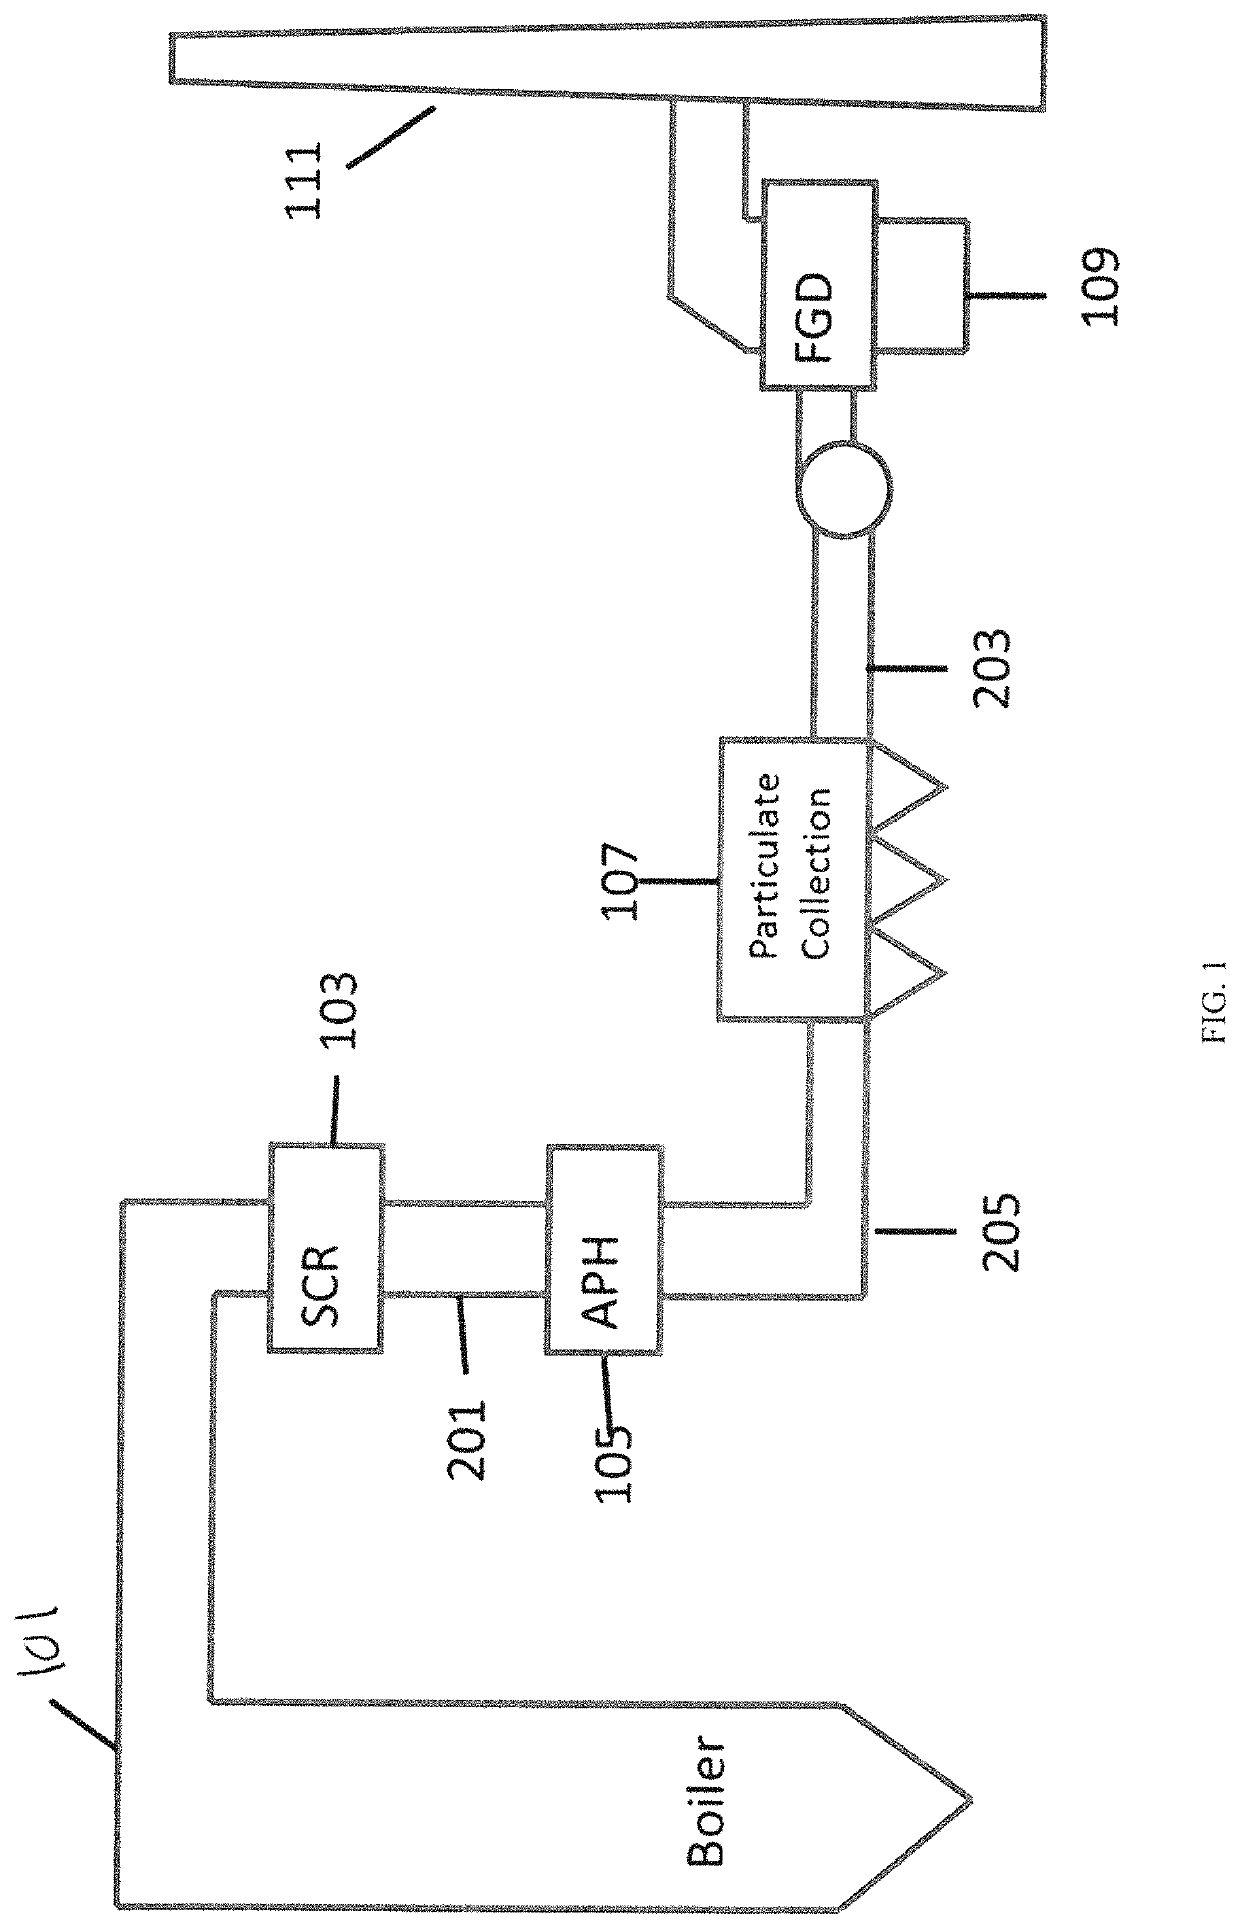 Systems and method for removal of acid gas in a circulating dry scrubber